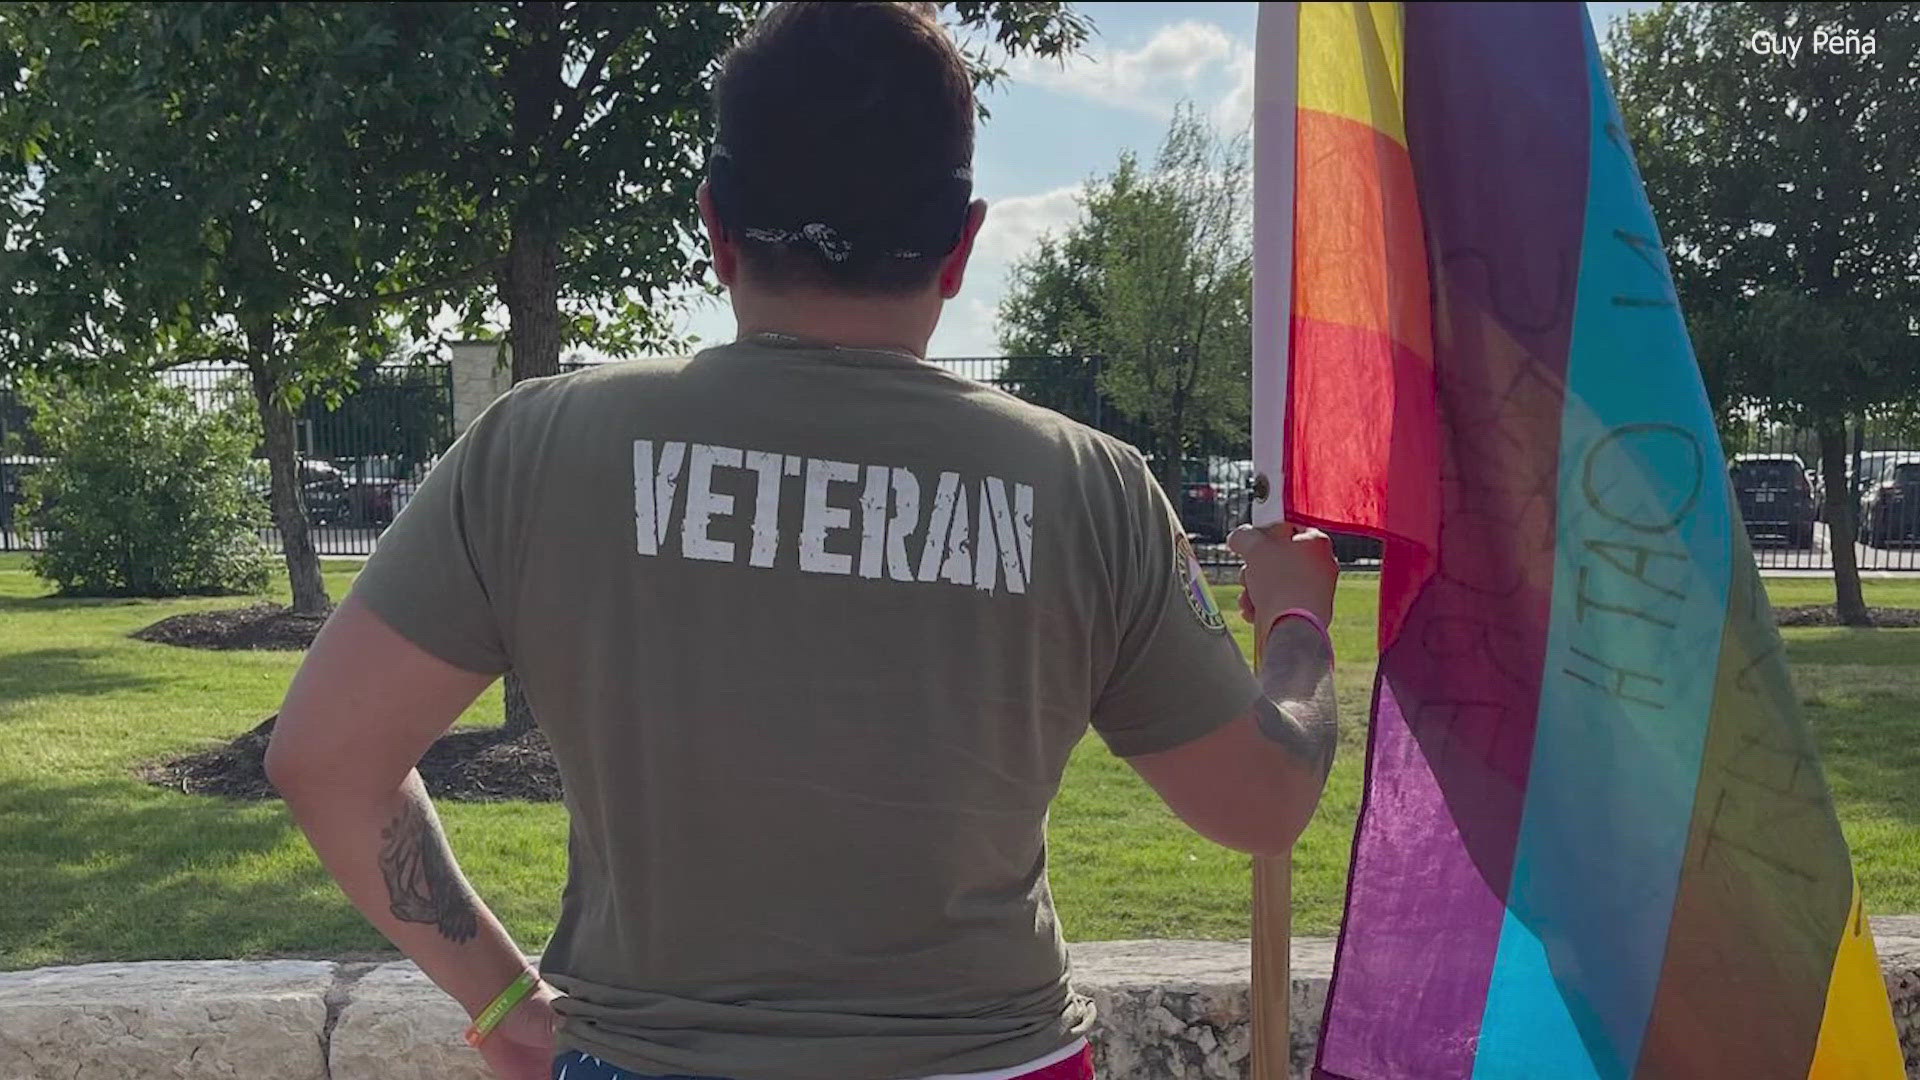 A number of veterans were discharged in the past over military regulations that prohibited homosexuality.